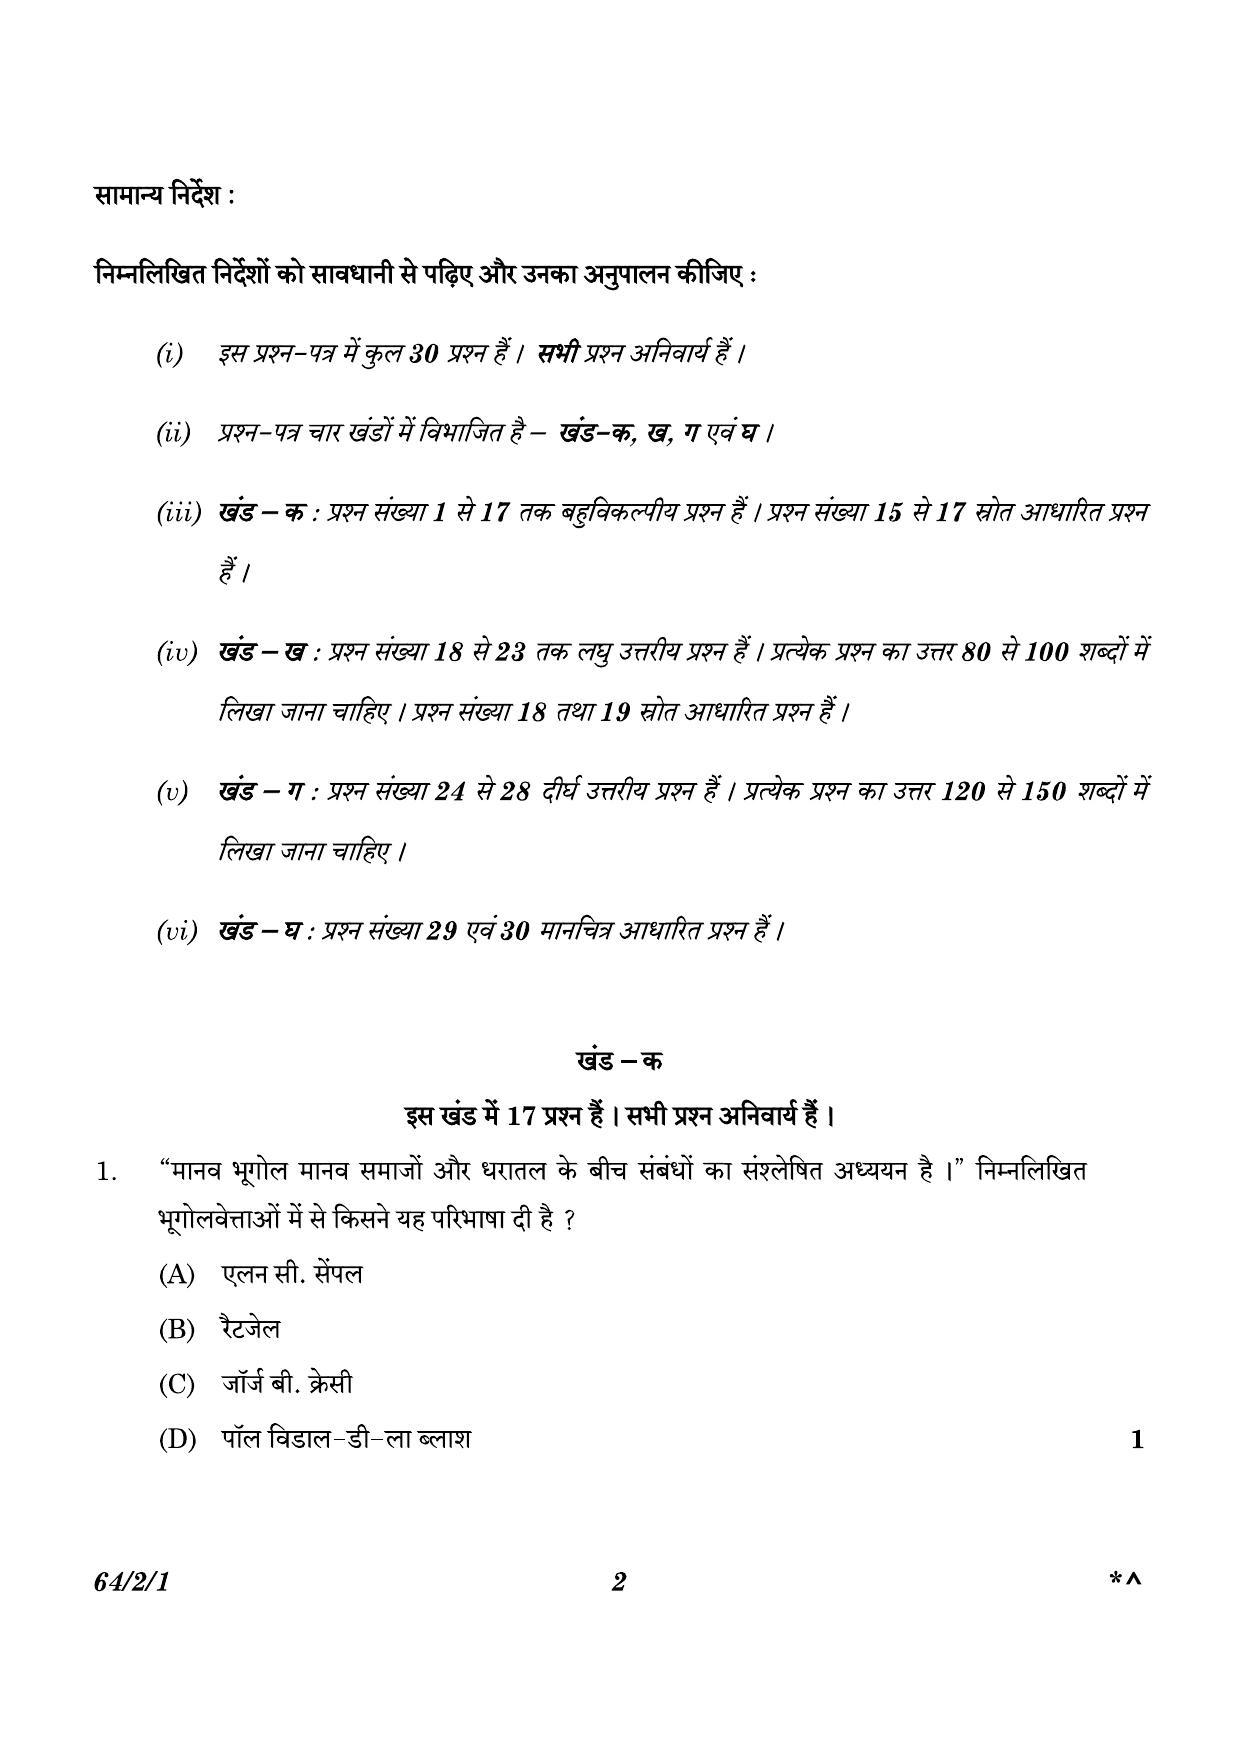 CBSE Class 12 64-2-1 Geography 2023 Question Paper - Page 2